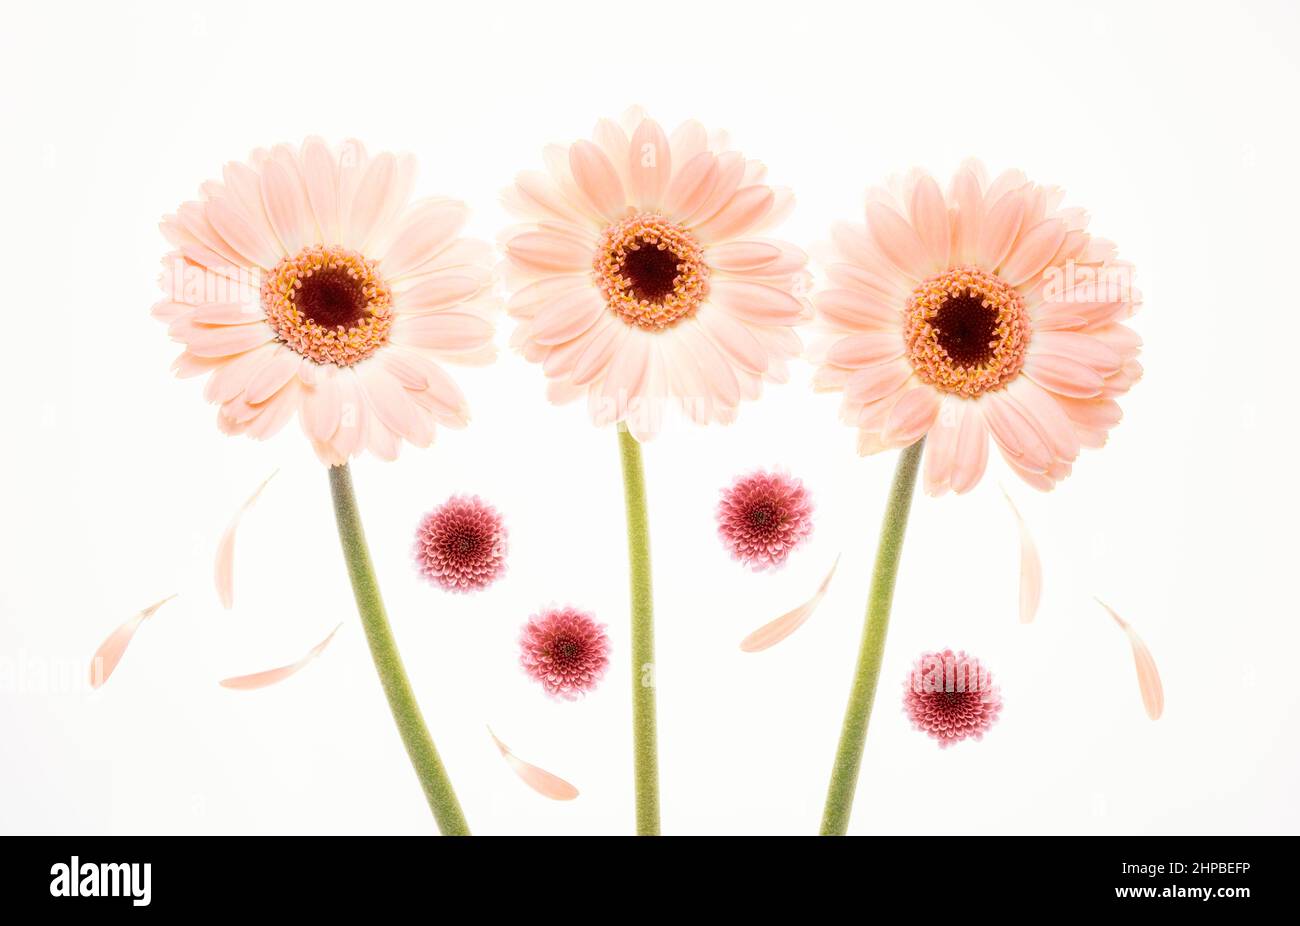 Floral still life with pastel Gerberas ,petals and purple Chrysanthemums Stock Photo